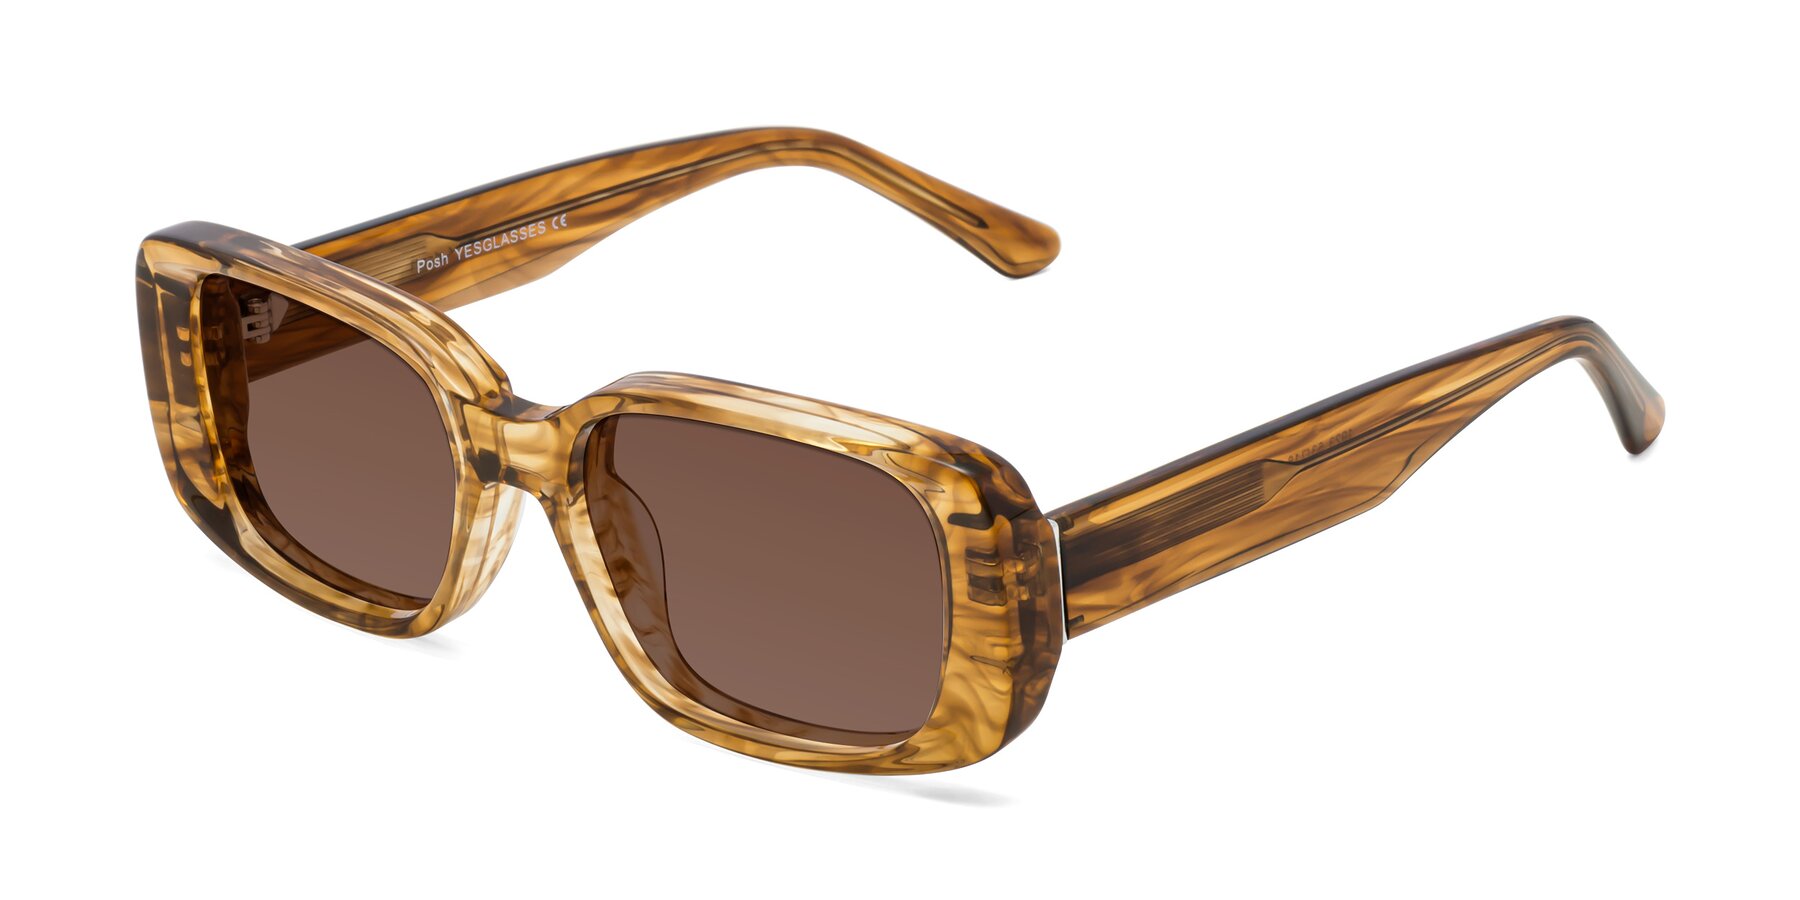 Angle of Posh in Stripe Amber with Brown Tinted Lenses